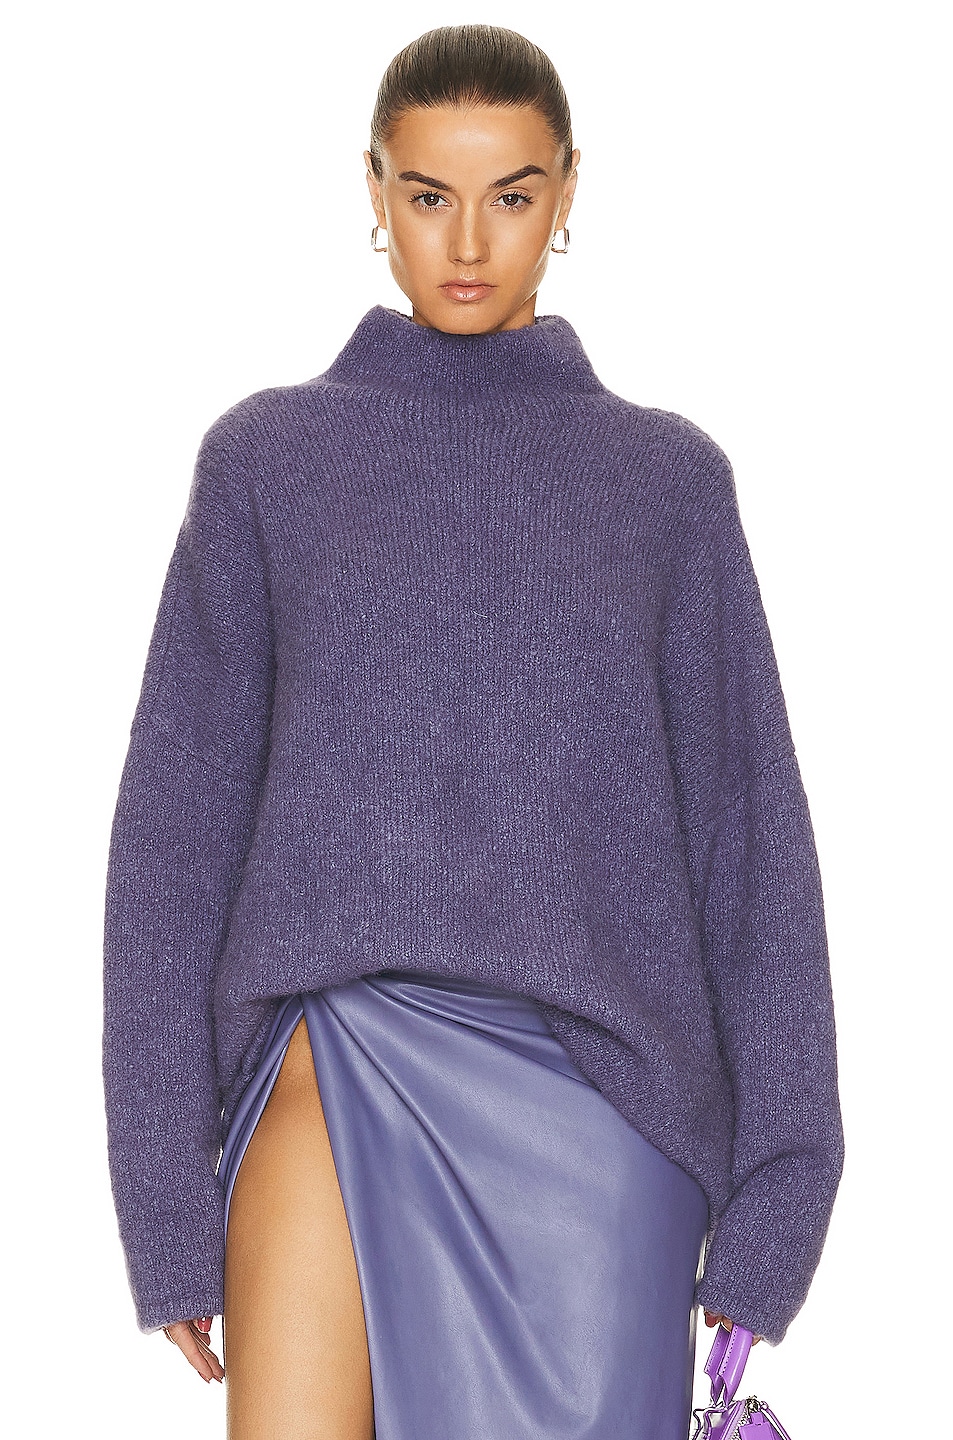 Brushed Alpaca Relaxed Turtleneck Sweater in Purple